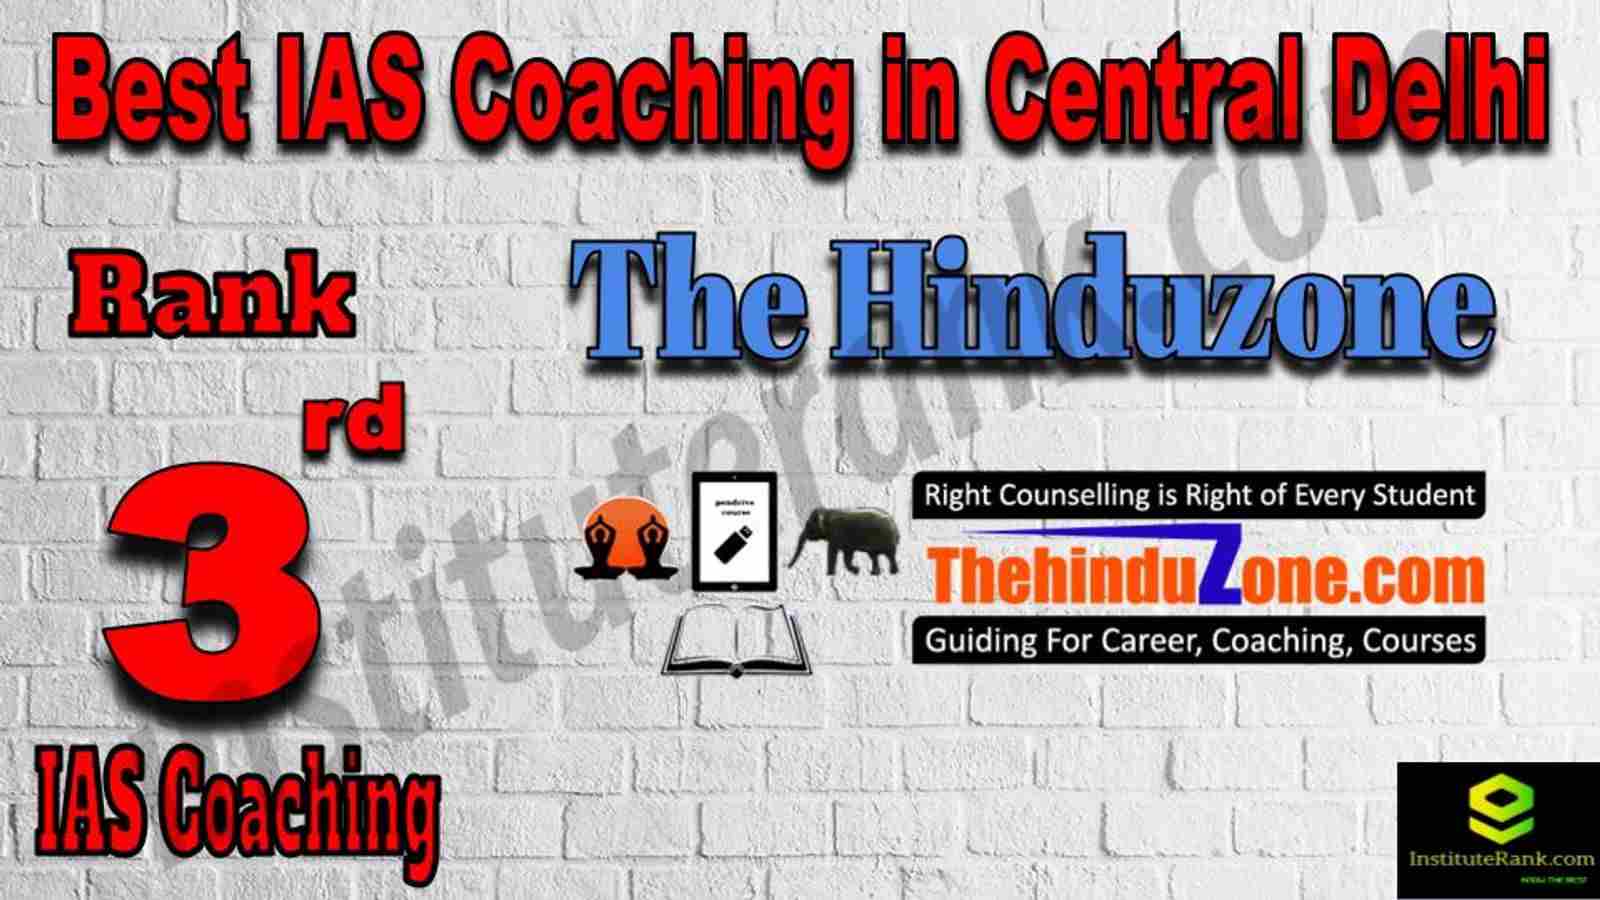 3rd Best IAS Coaching in Central Delhi